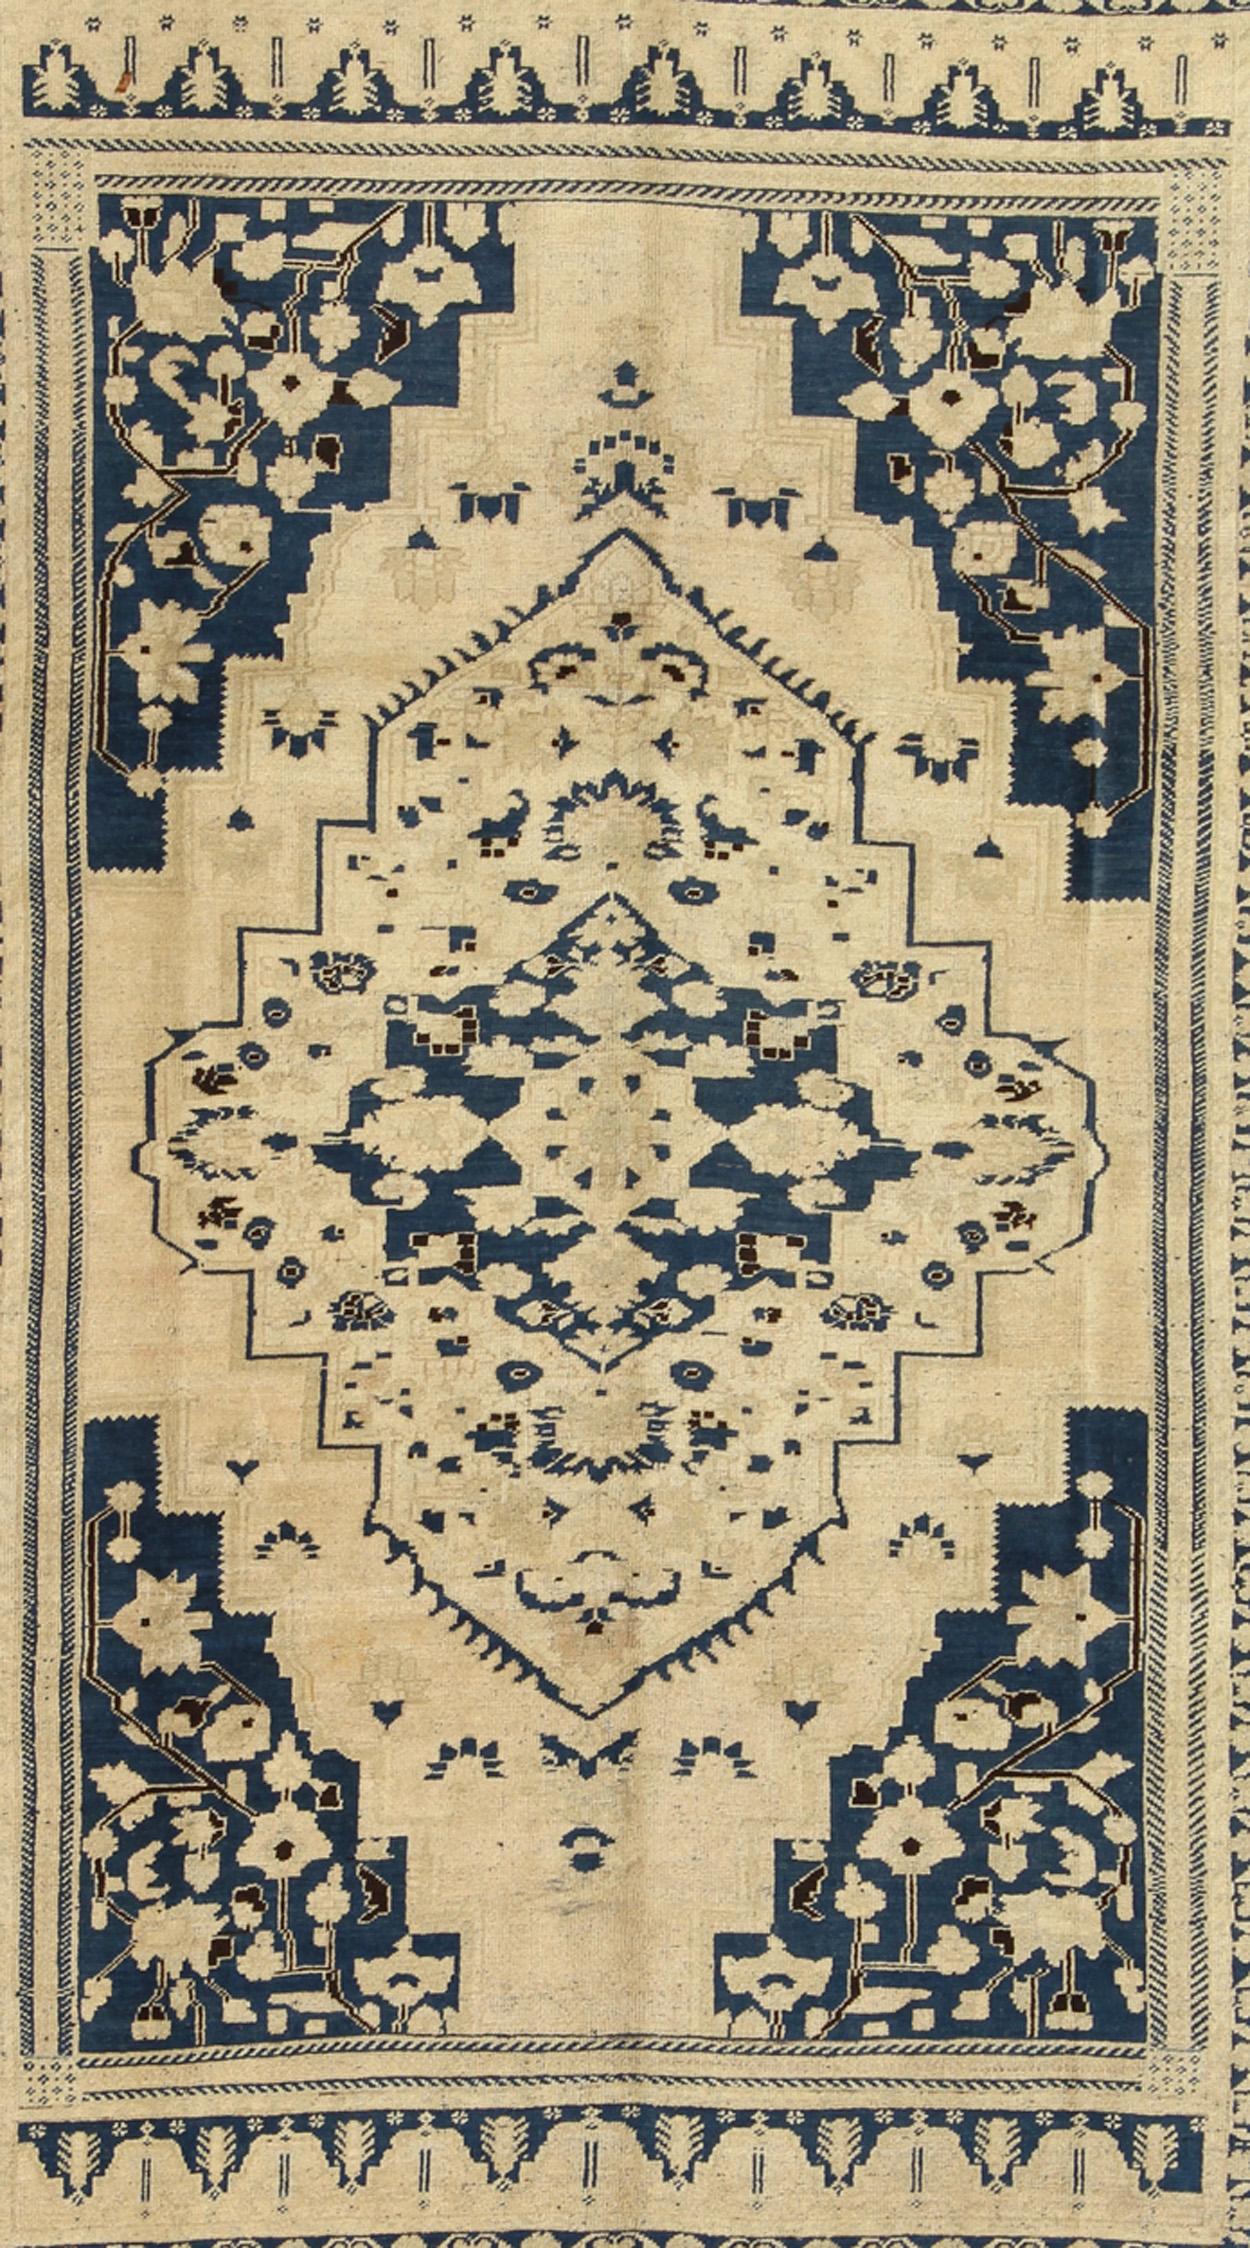 Measures: 7'11 x 10'11

This vintage Oushak features classic Oushak medallion designs, with more contemporary colors. The antique-white field displays a large central diamond medallion, decorated with abstract floral motifs rendered in royal blue.